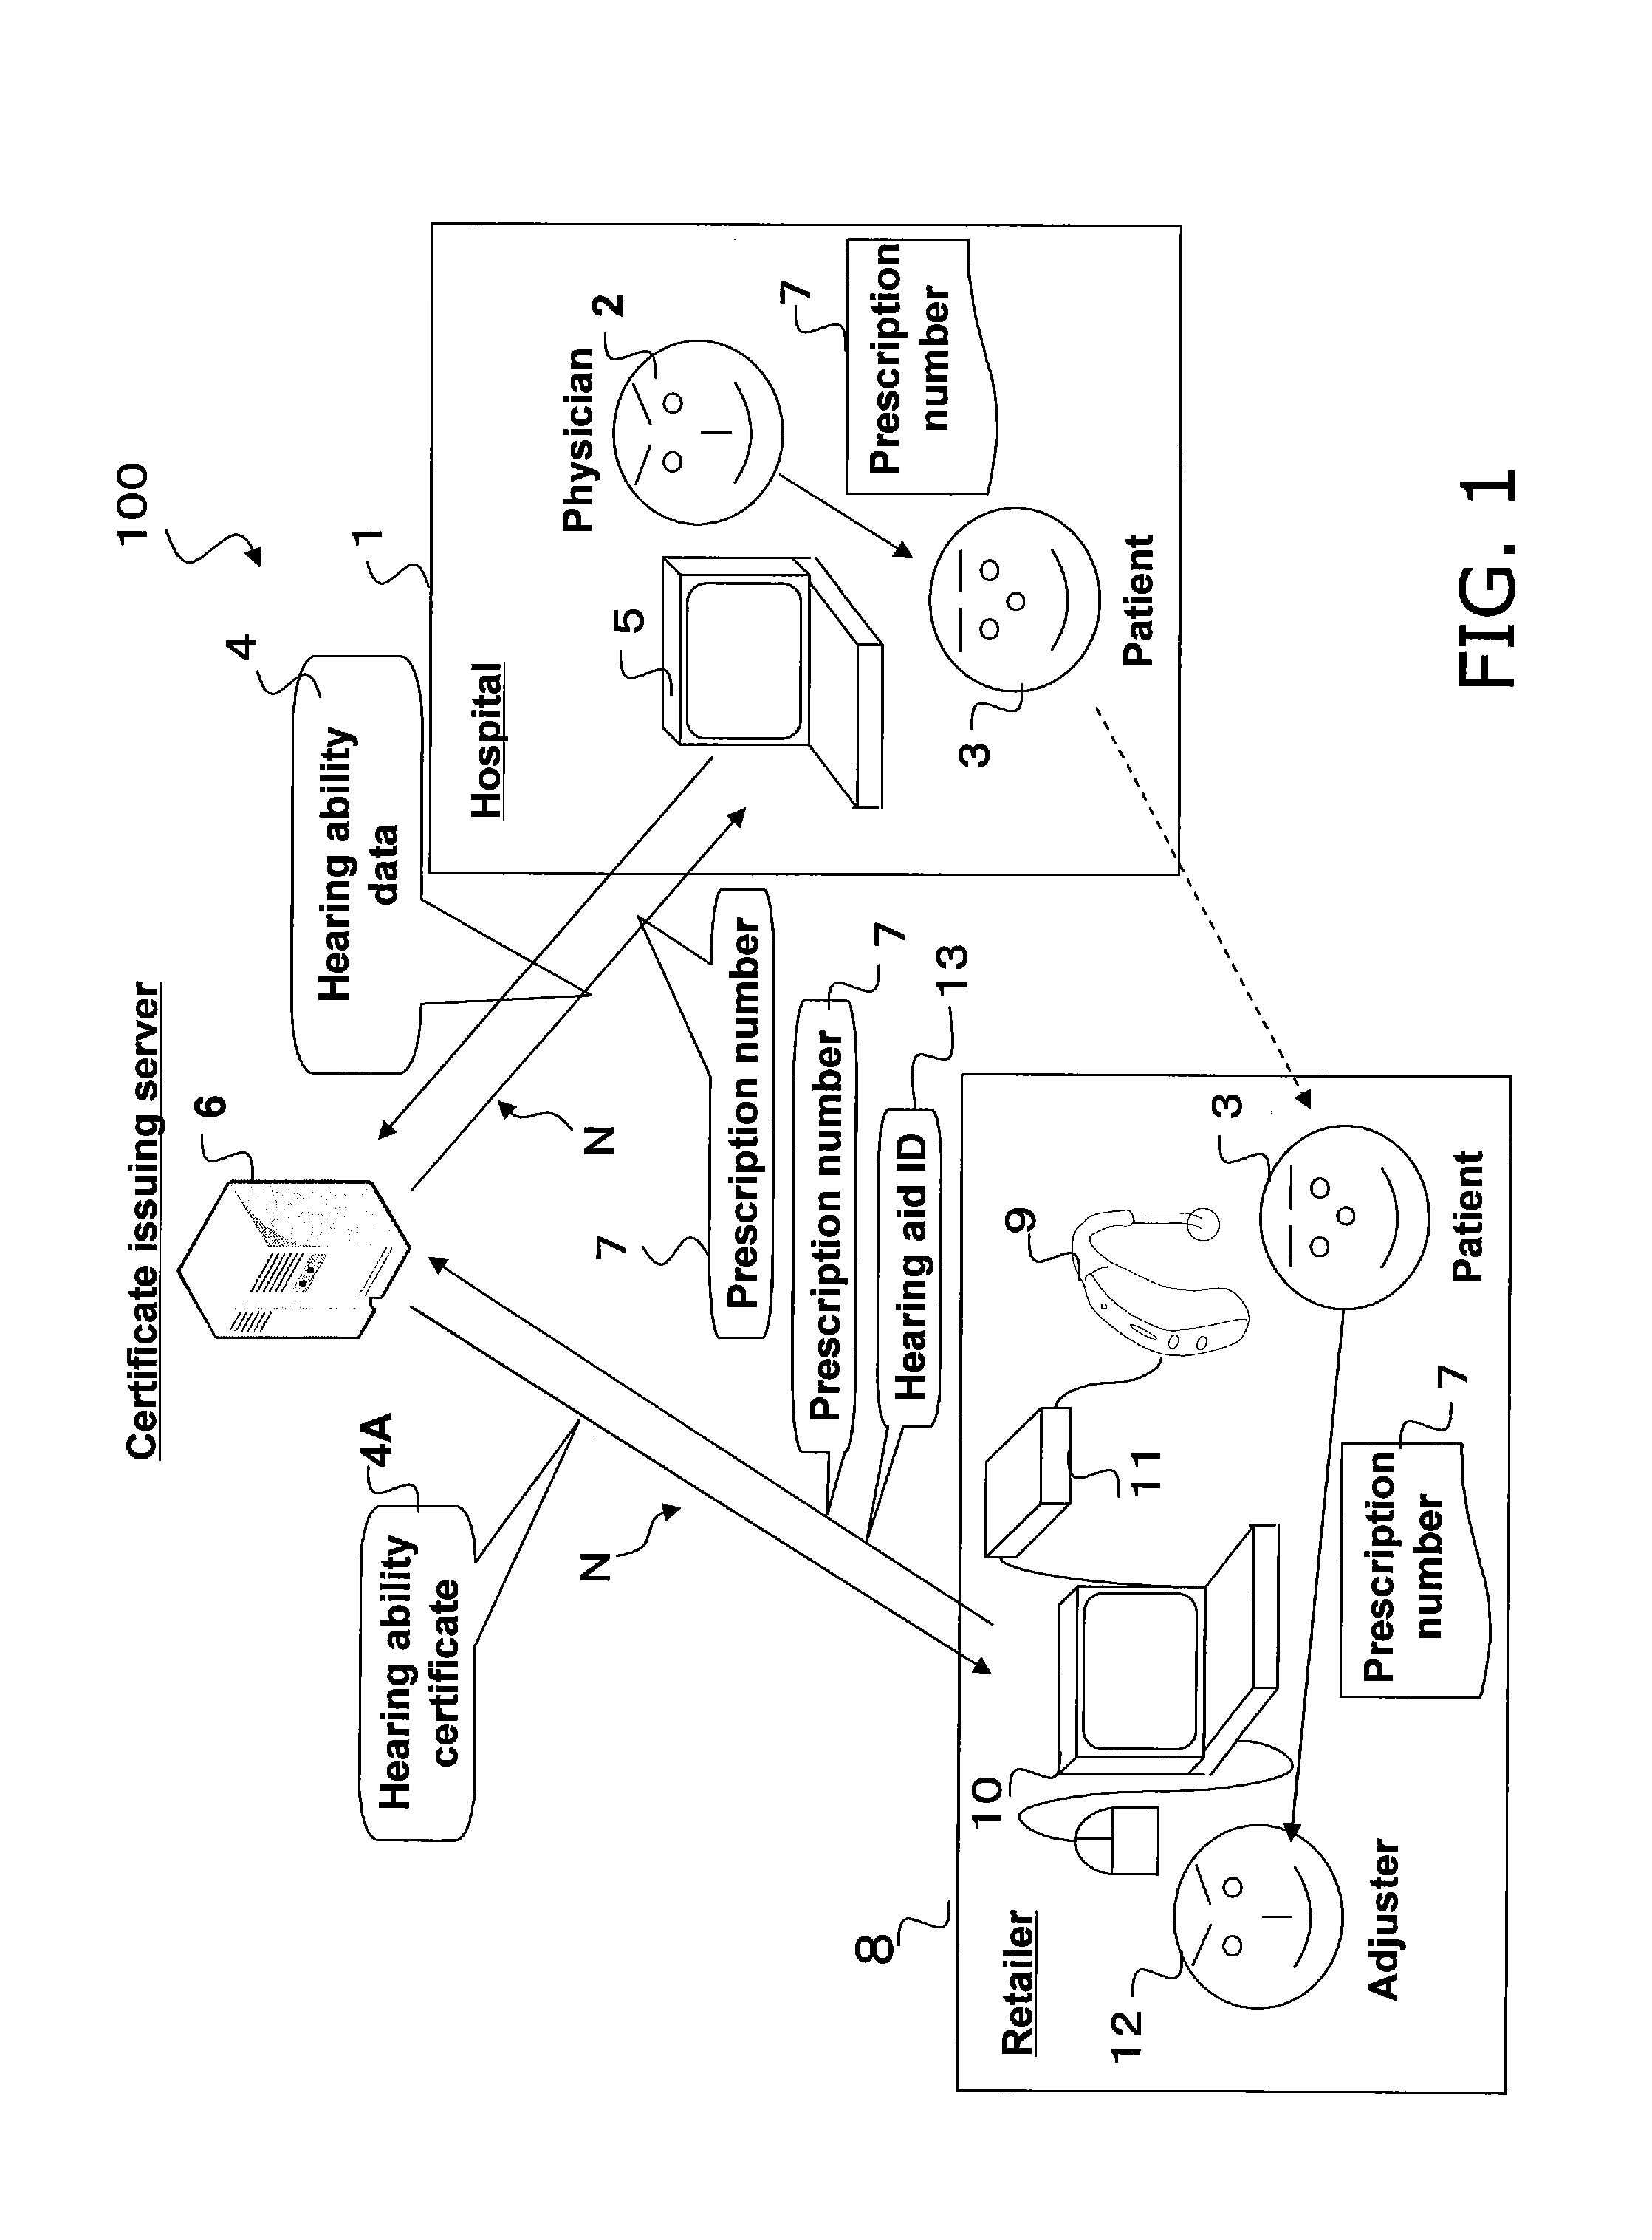 Hearing aid, hearing aid fitting management system, server device, and computer device